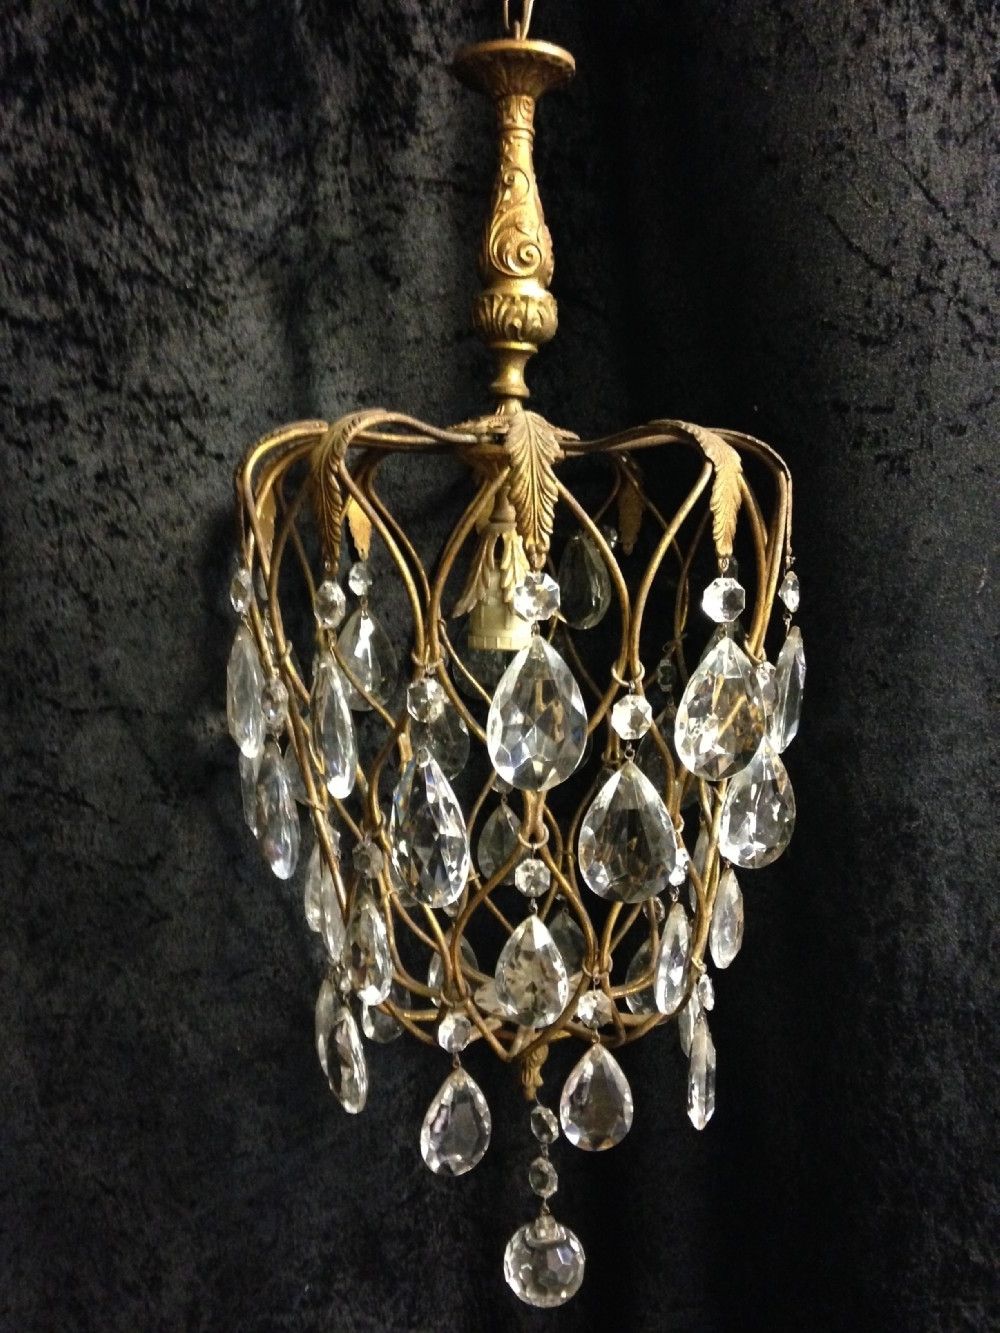 Small Antique Italian Pineapple Chandelier (View 12 of 20)